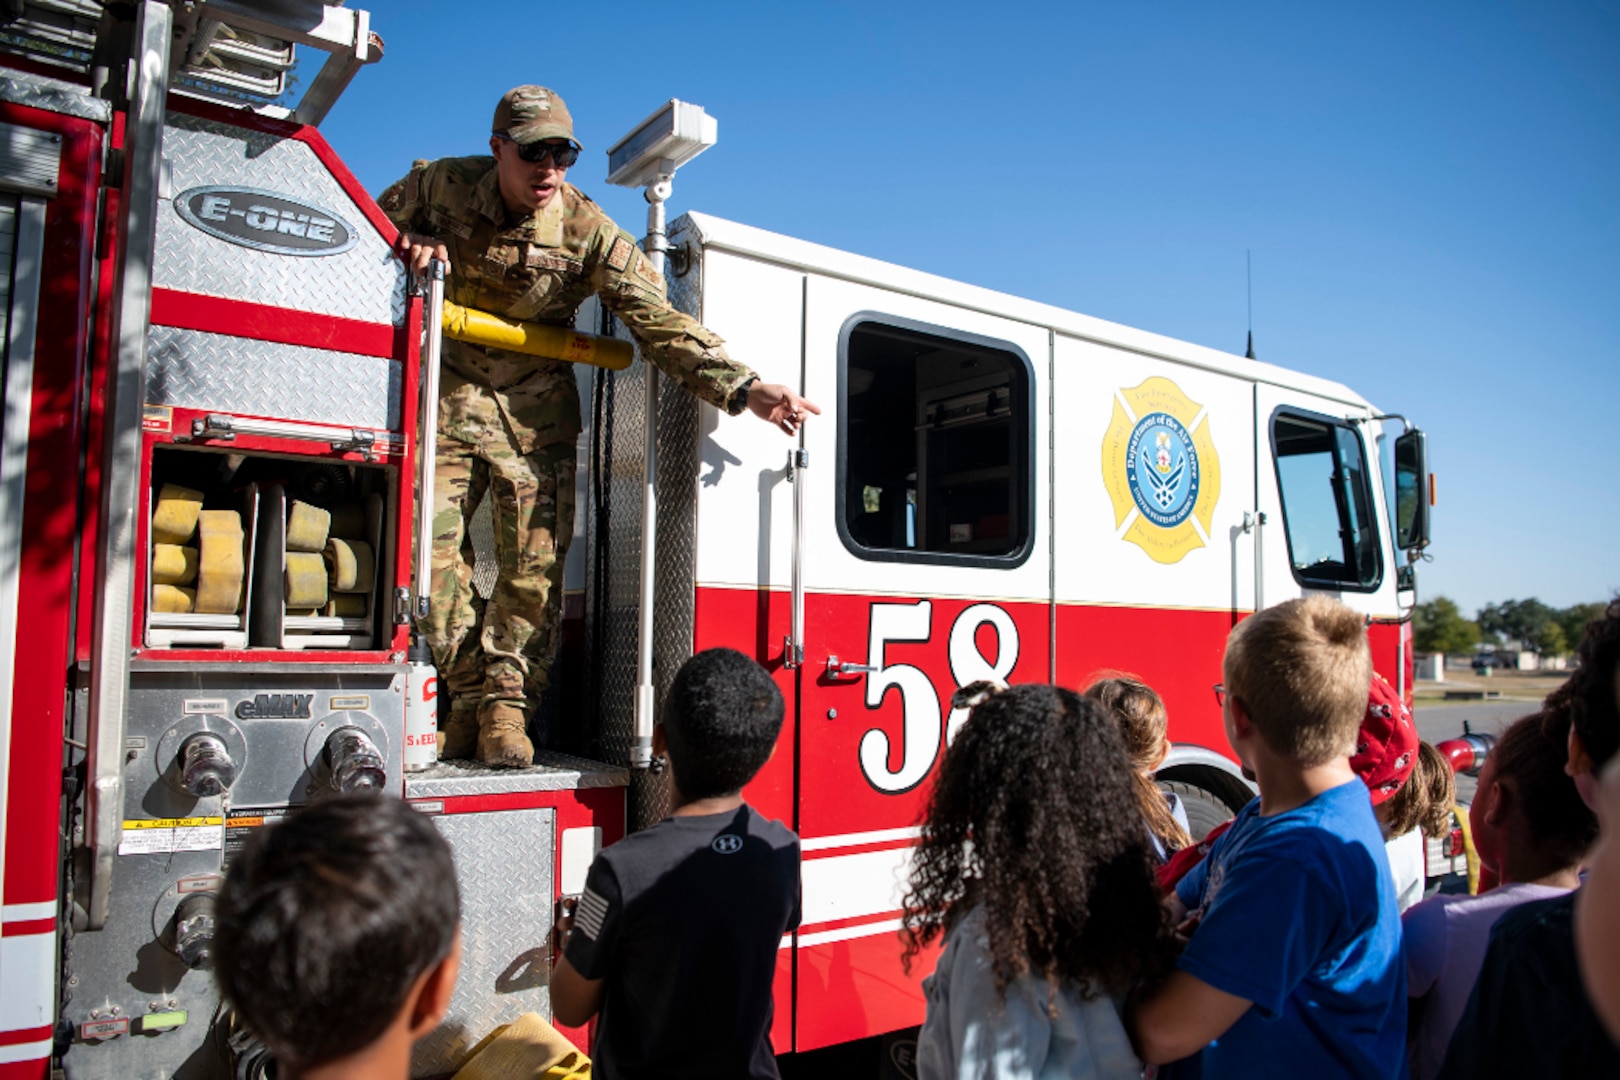 902nd Civil Engineering Squadron supports Fire Prevention Week at JBSA-Randolph